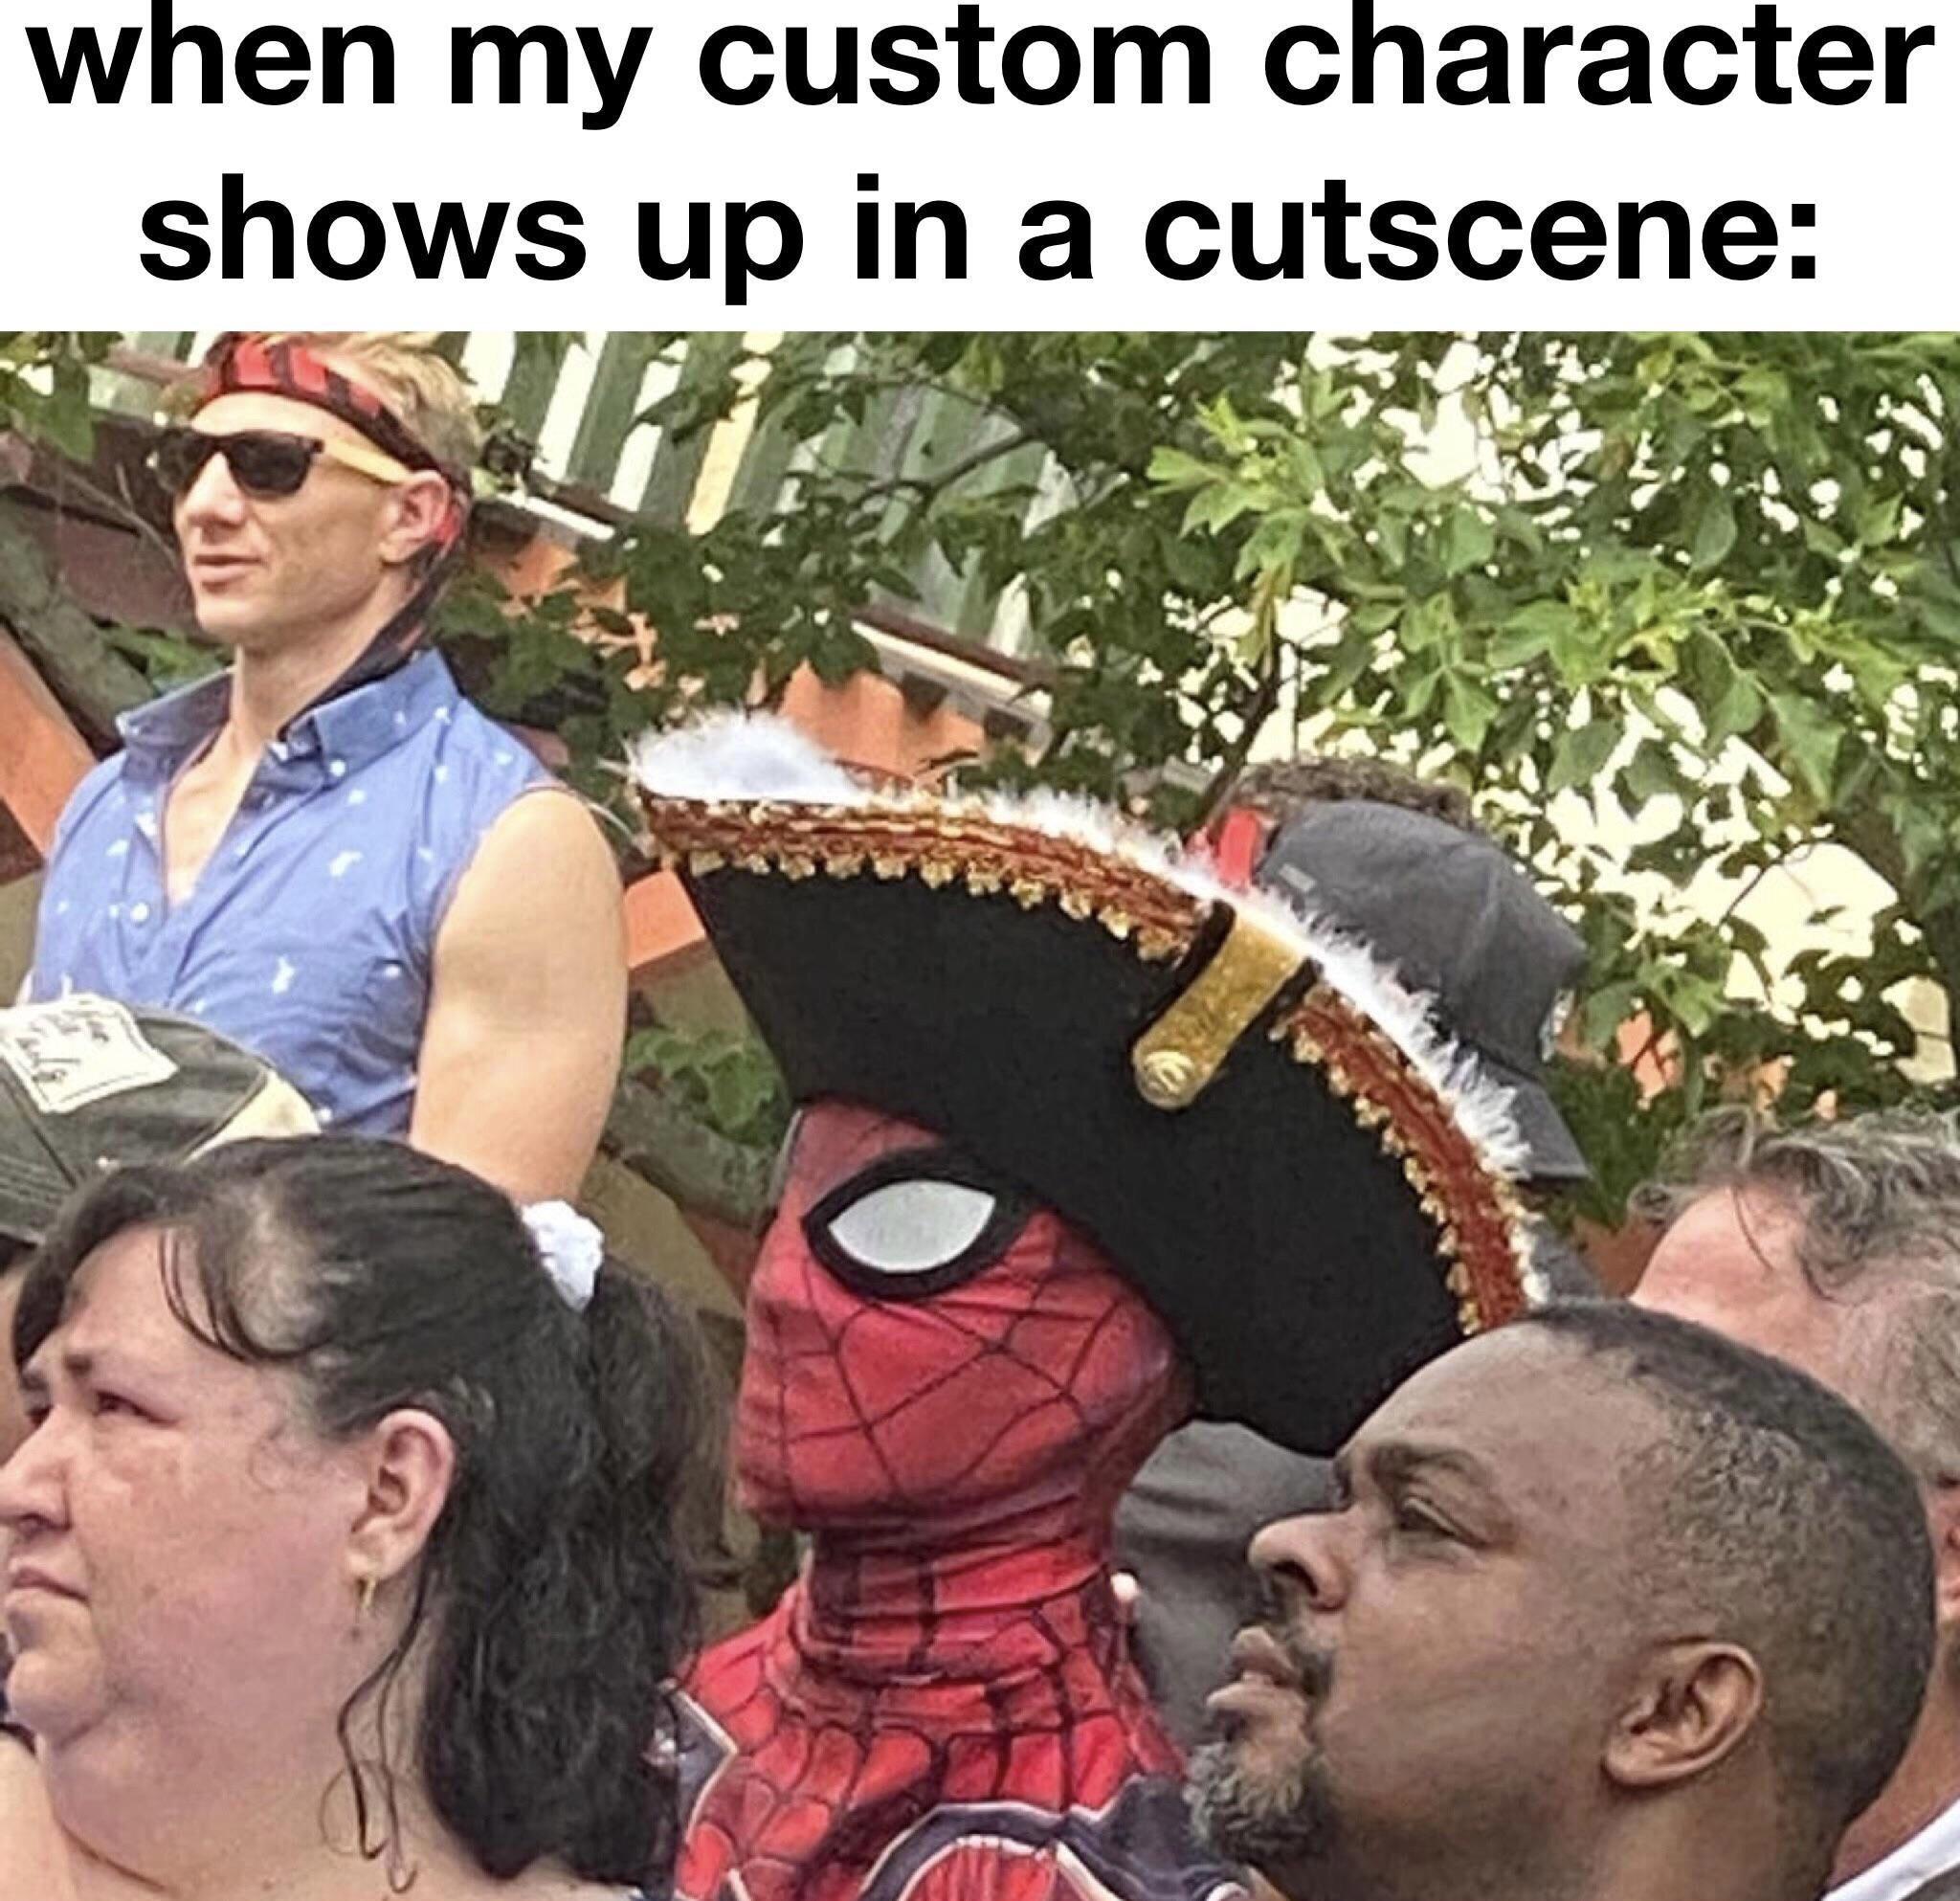 funny gaming memes - Internet meme - when my custom character shows up in a cutscene